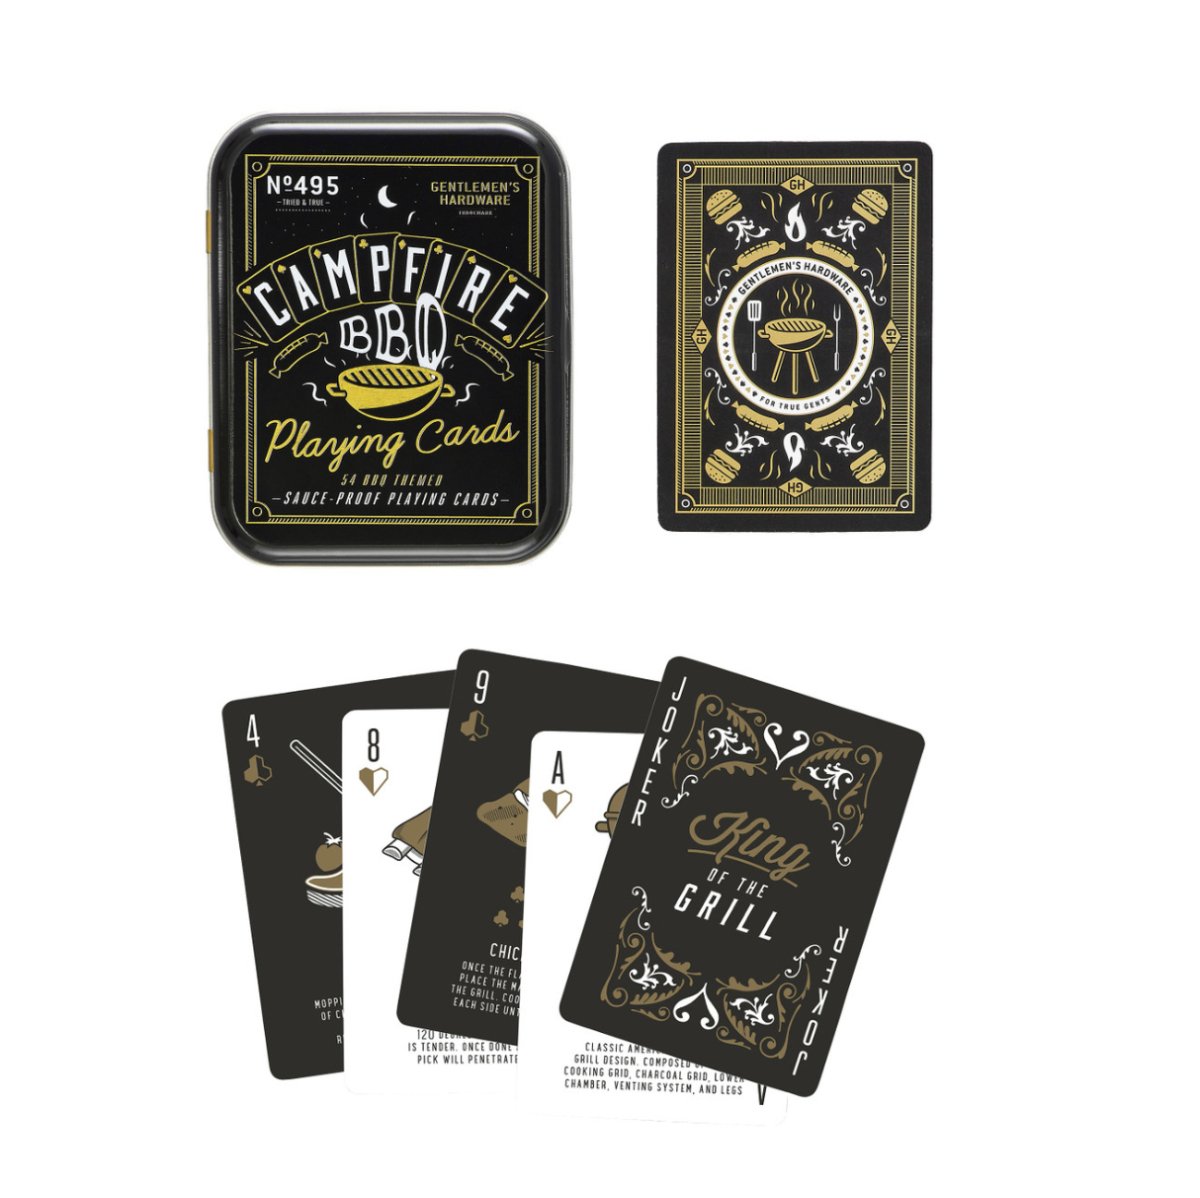 Campfire BBQ Playing Cards - Alpine Abode